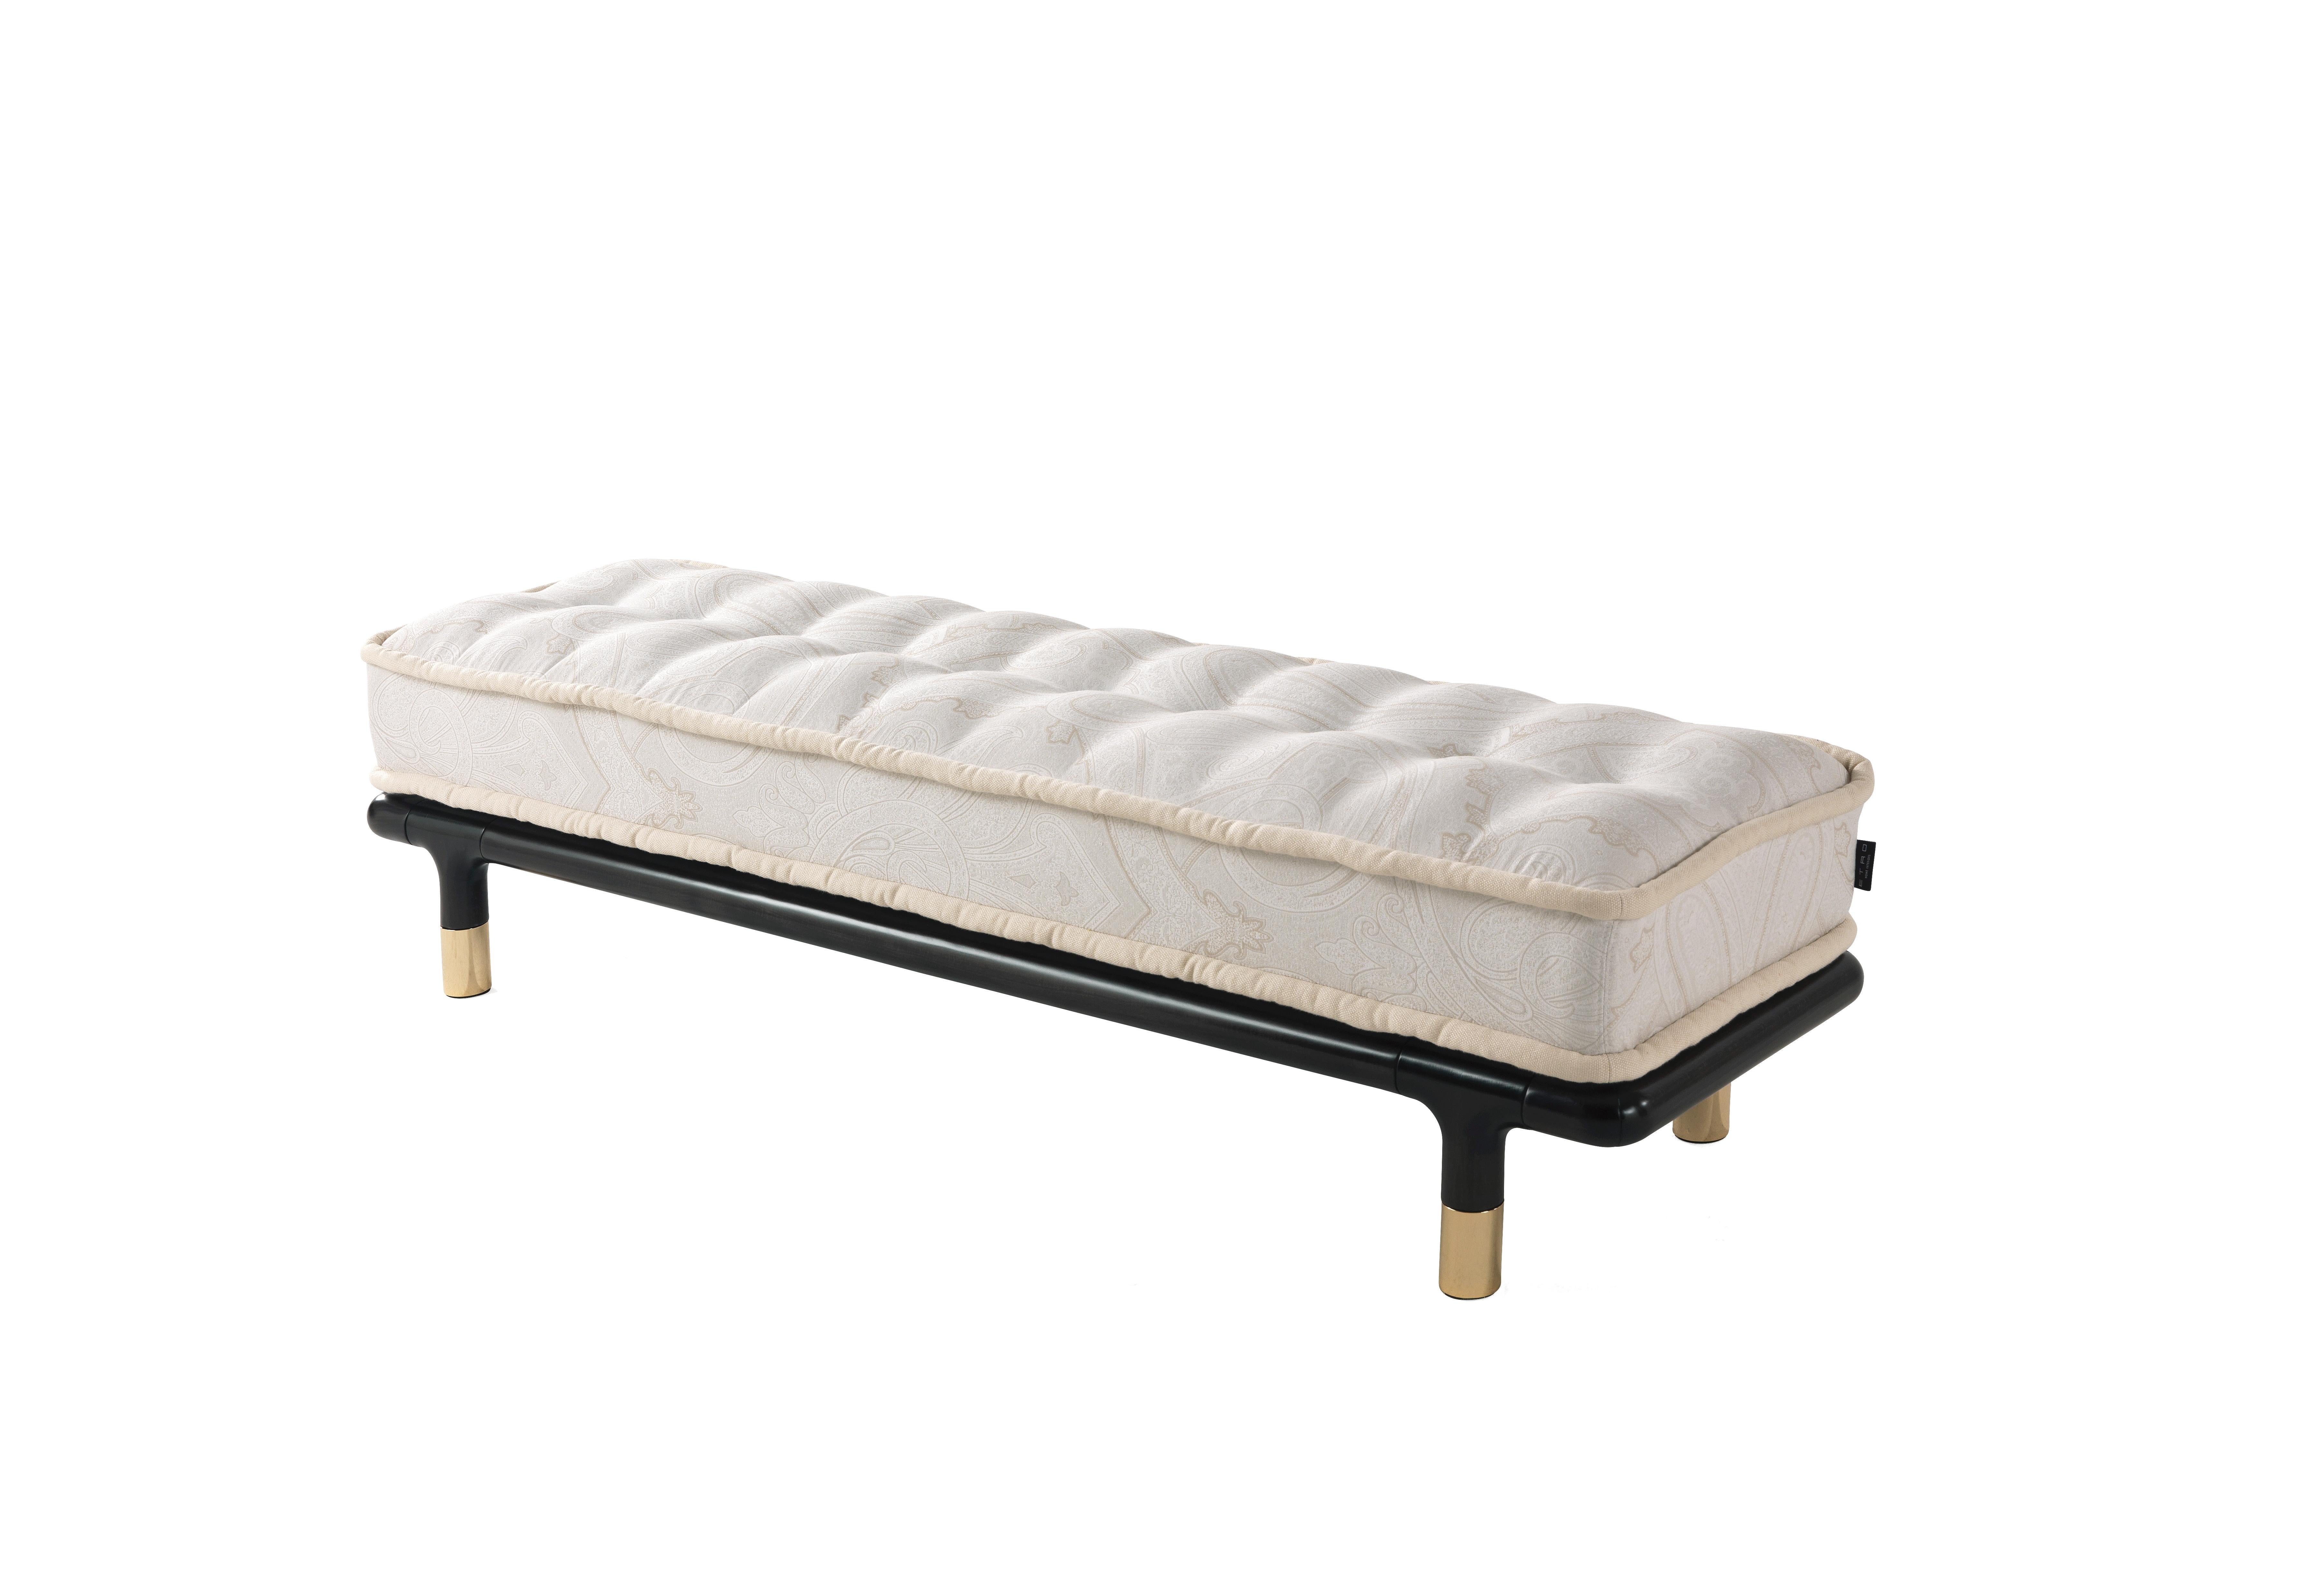 “A Thousand and One Nights” atmosphere for the Woodstock bench. The base in matt dark wengé dyed wood with an ethnic flair is combined with the champagne-coloured fabric with delicate ivory tone piping creating an elegant, sophisticated and eclectic